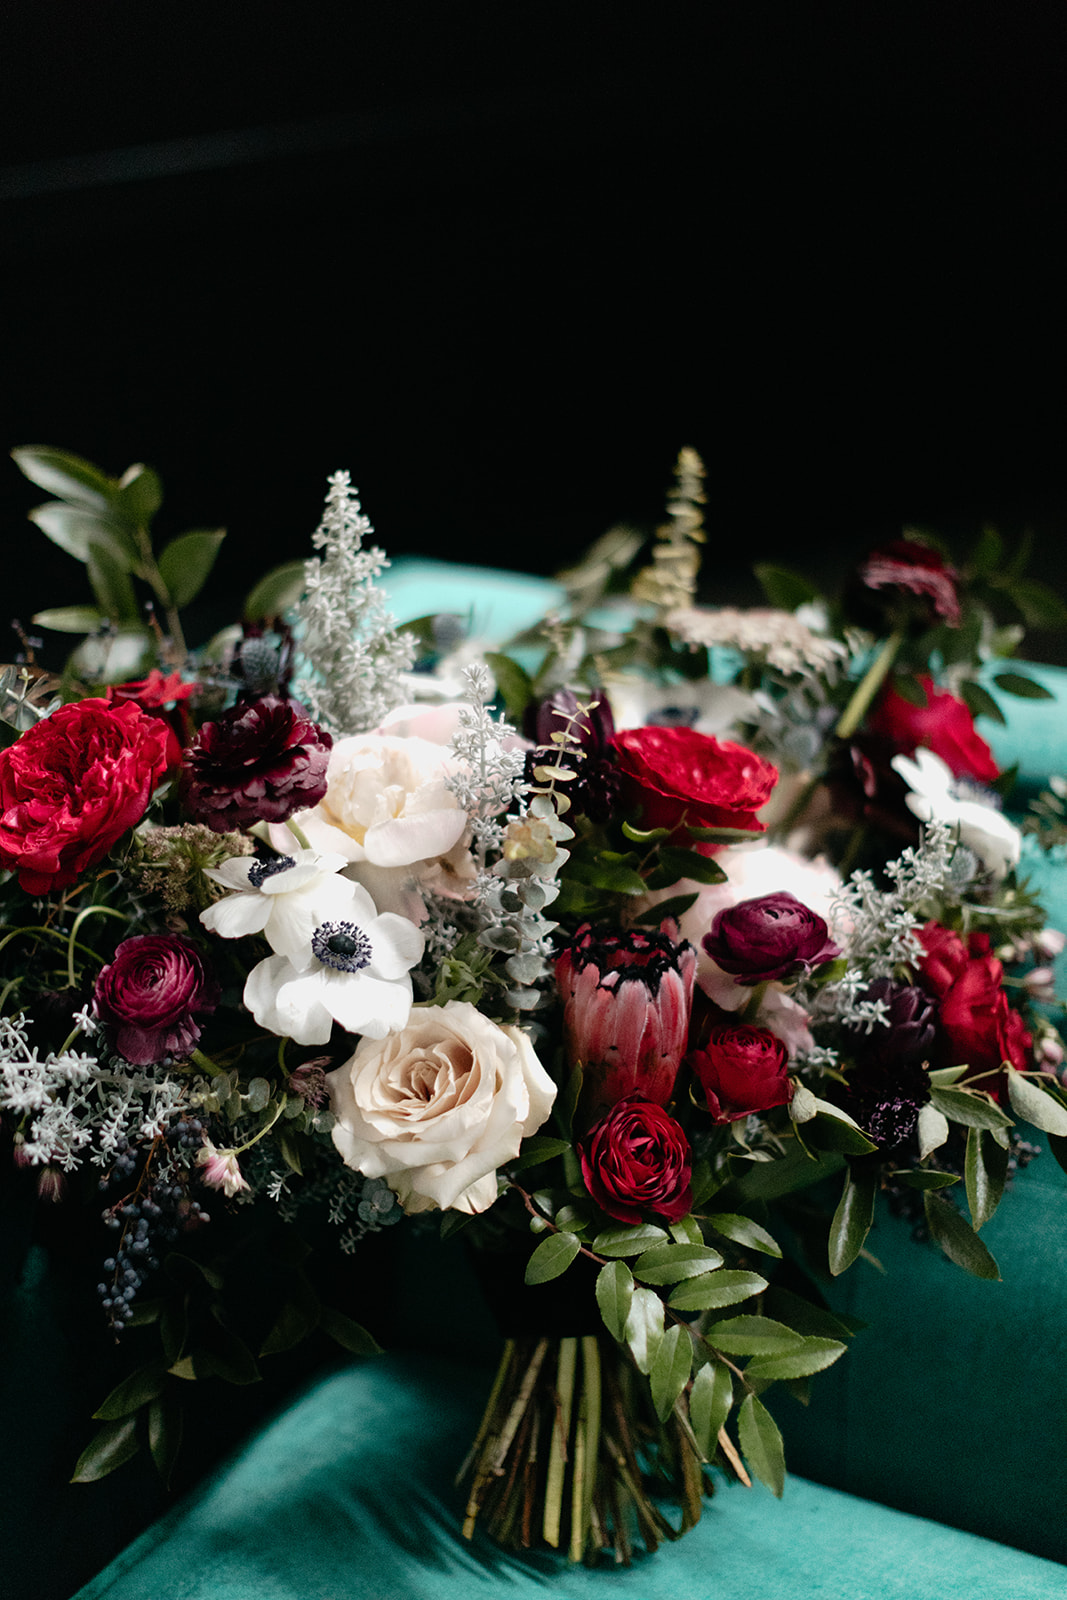 Lush, wintry bridal bouquet with garden roses, anemones, ranunculus, and greenery. Nashville Wedding Florist.